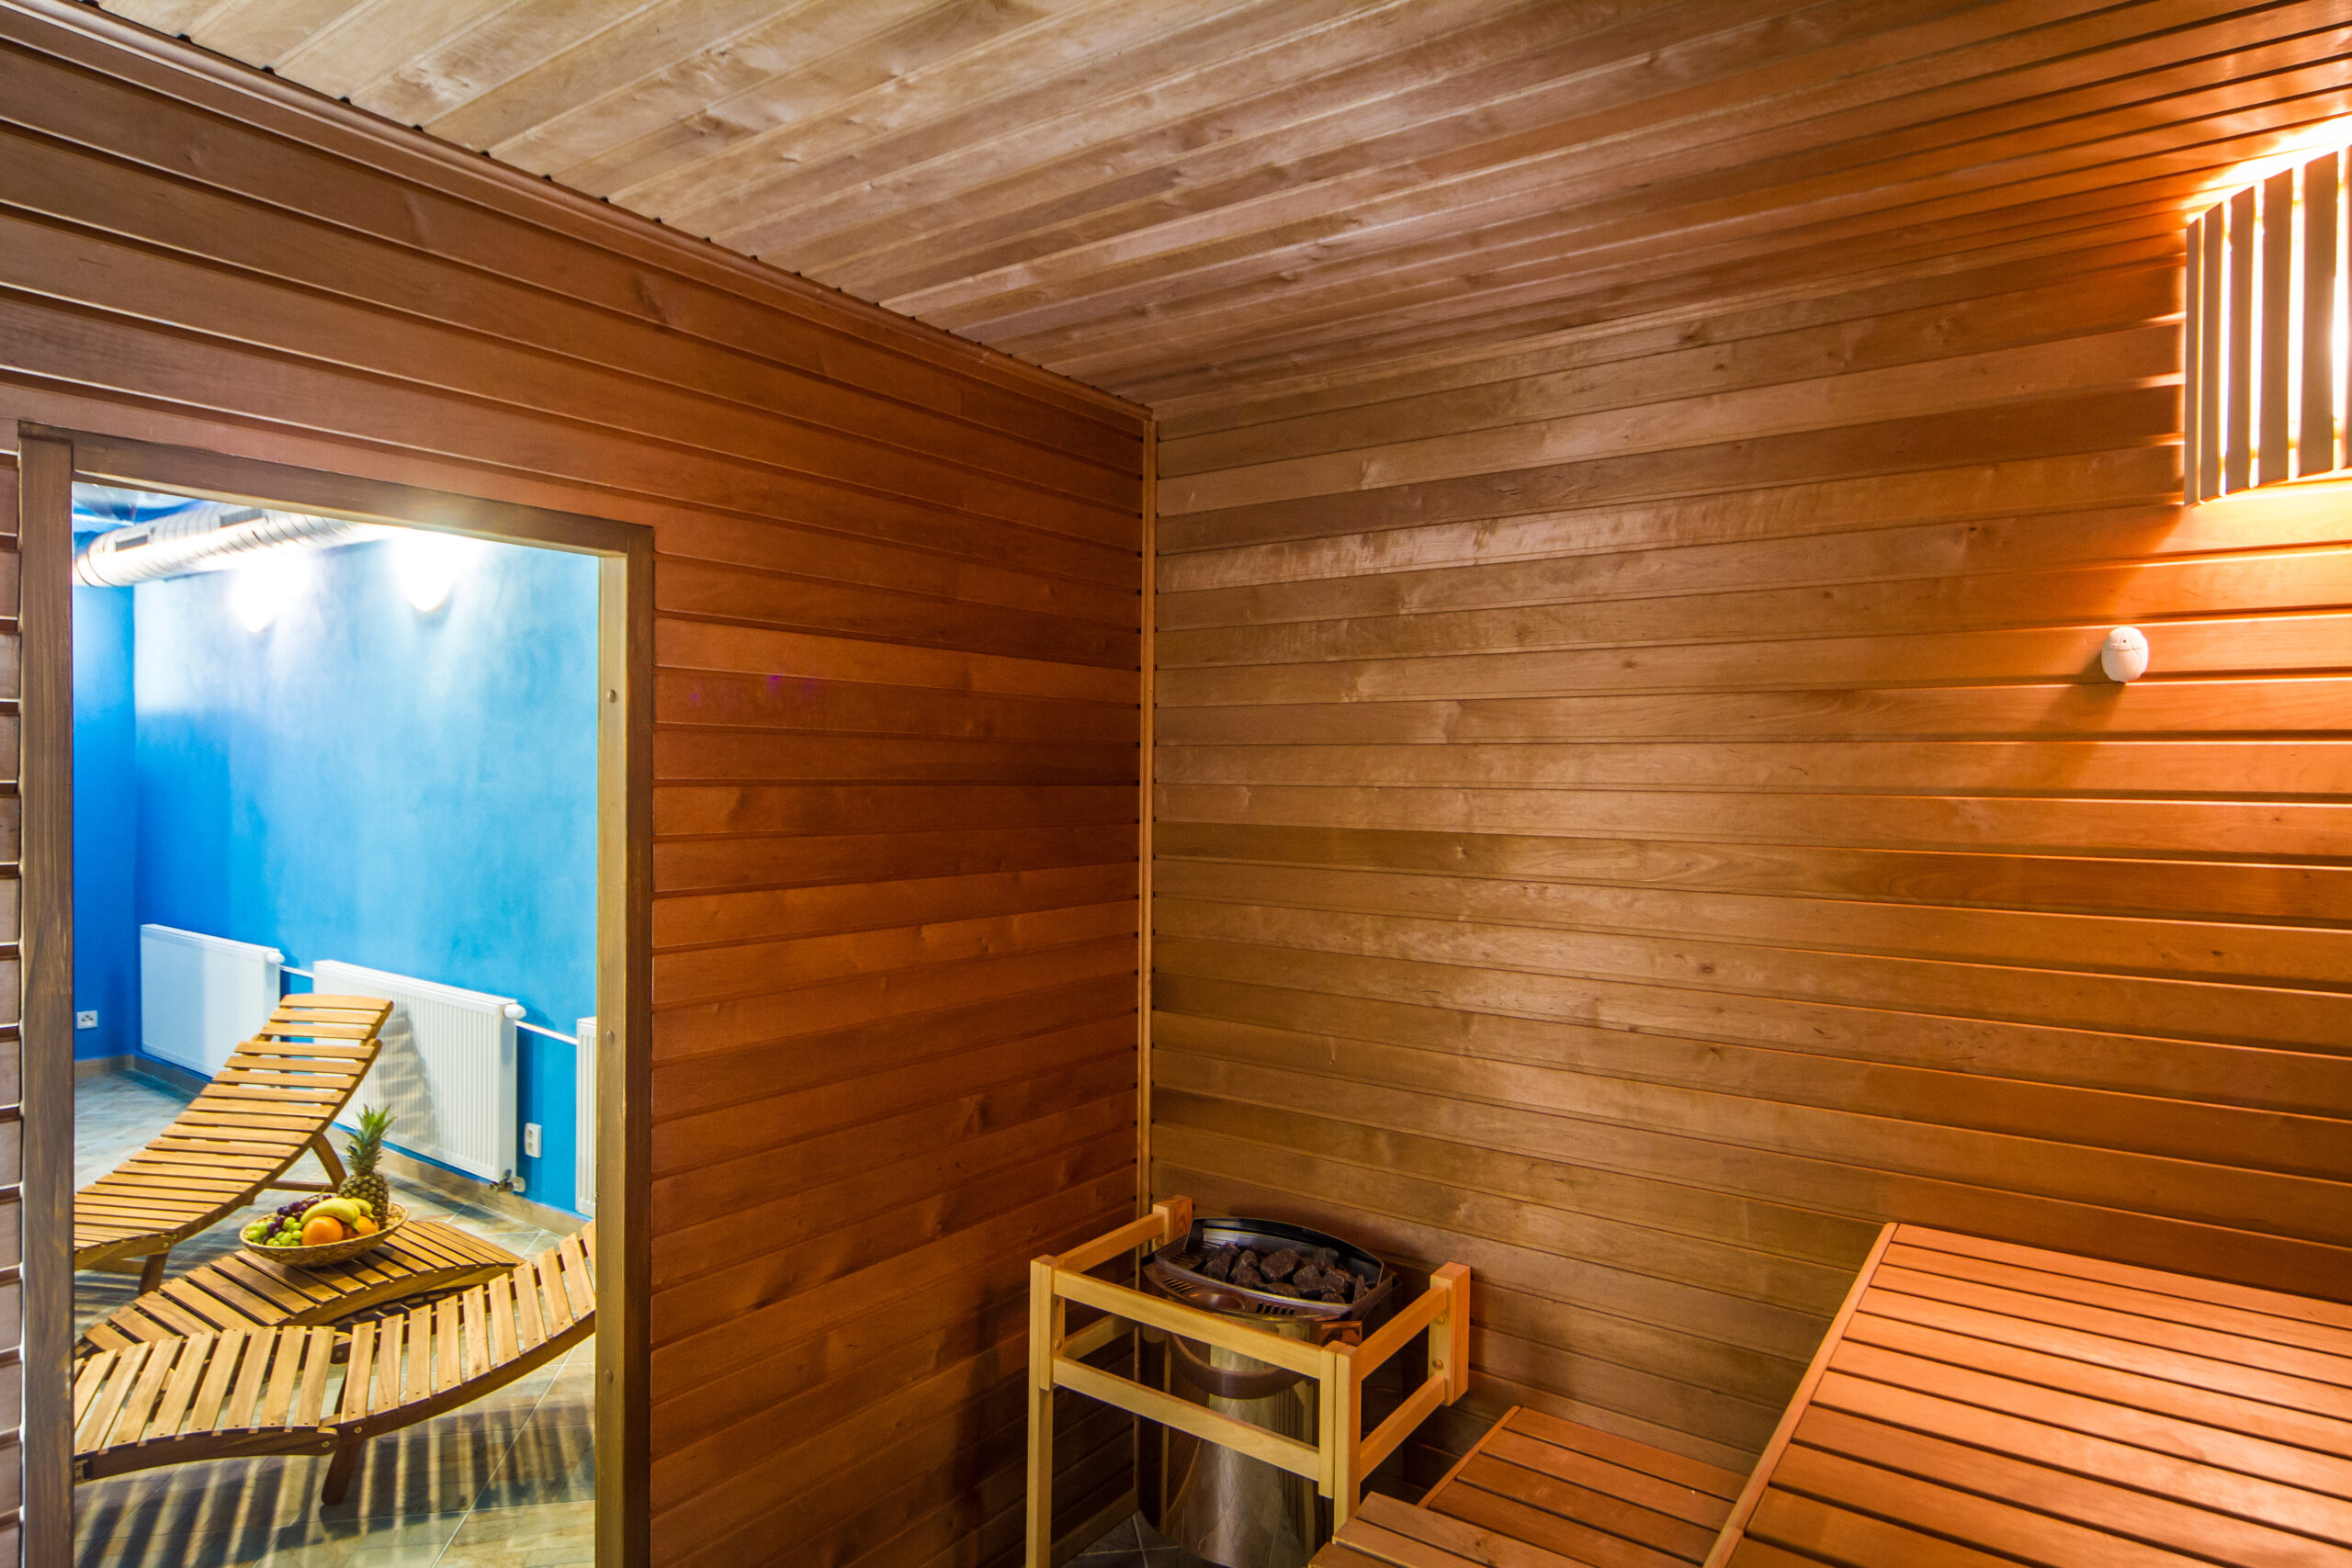 Spacious sauna with benches